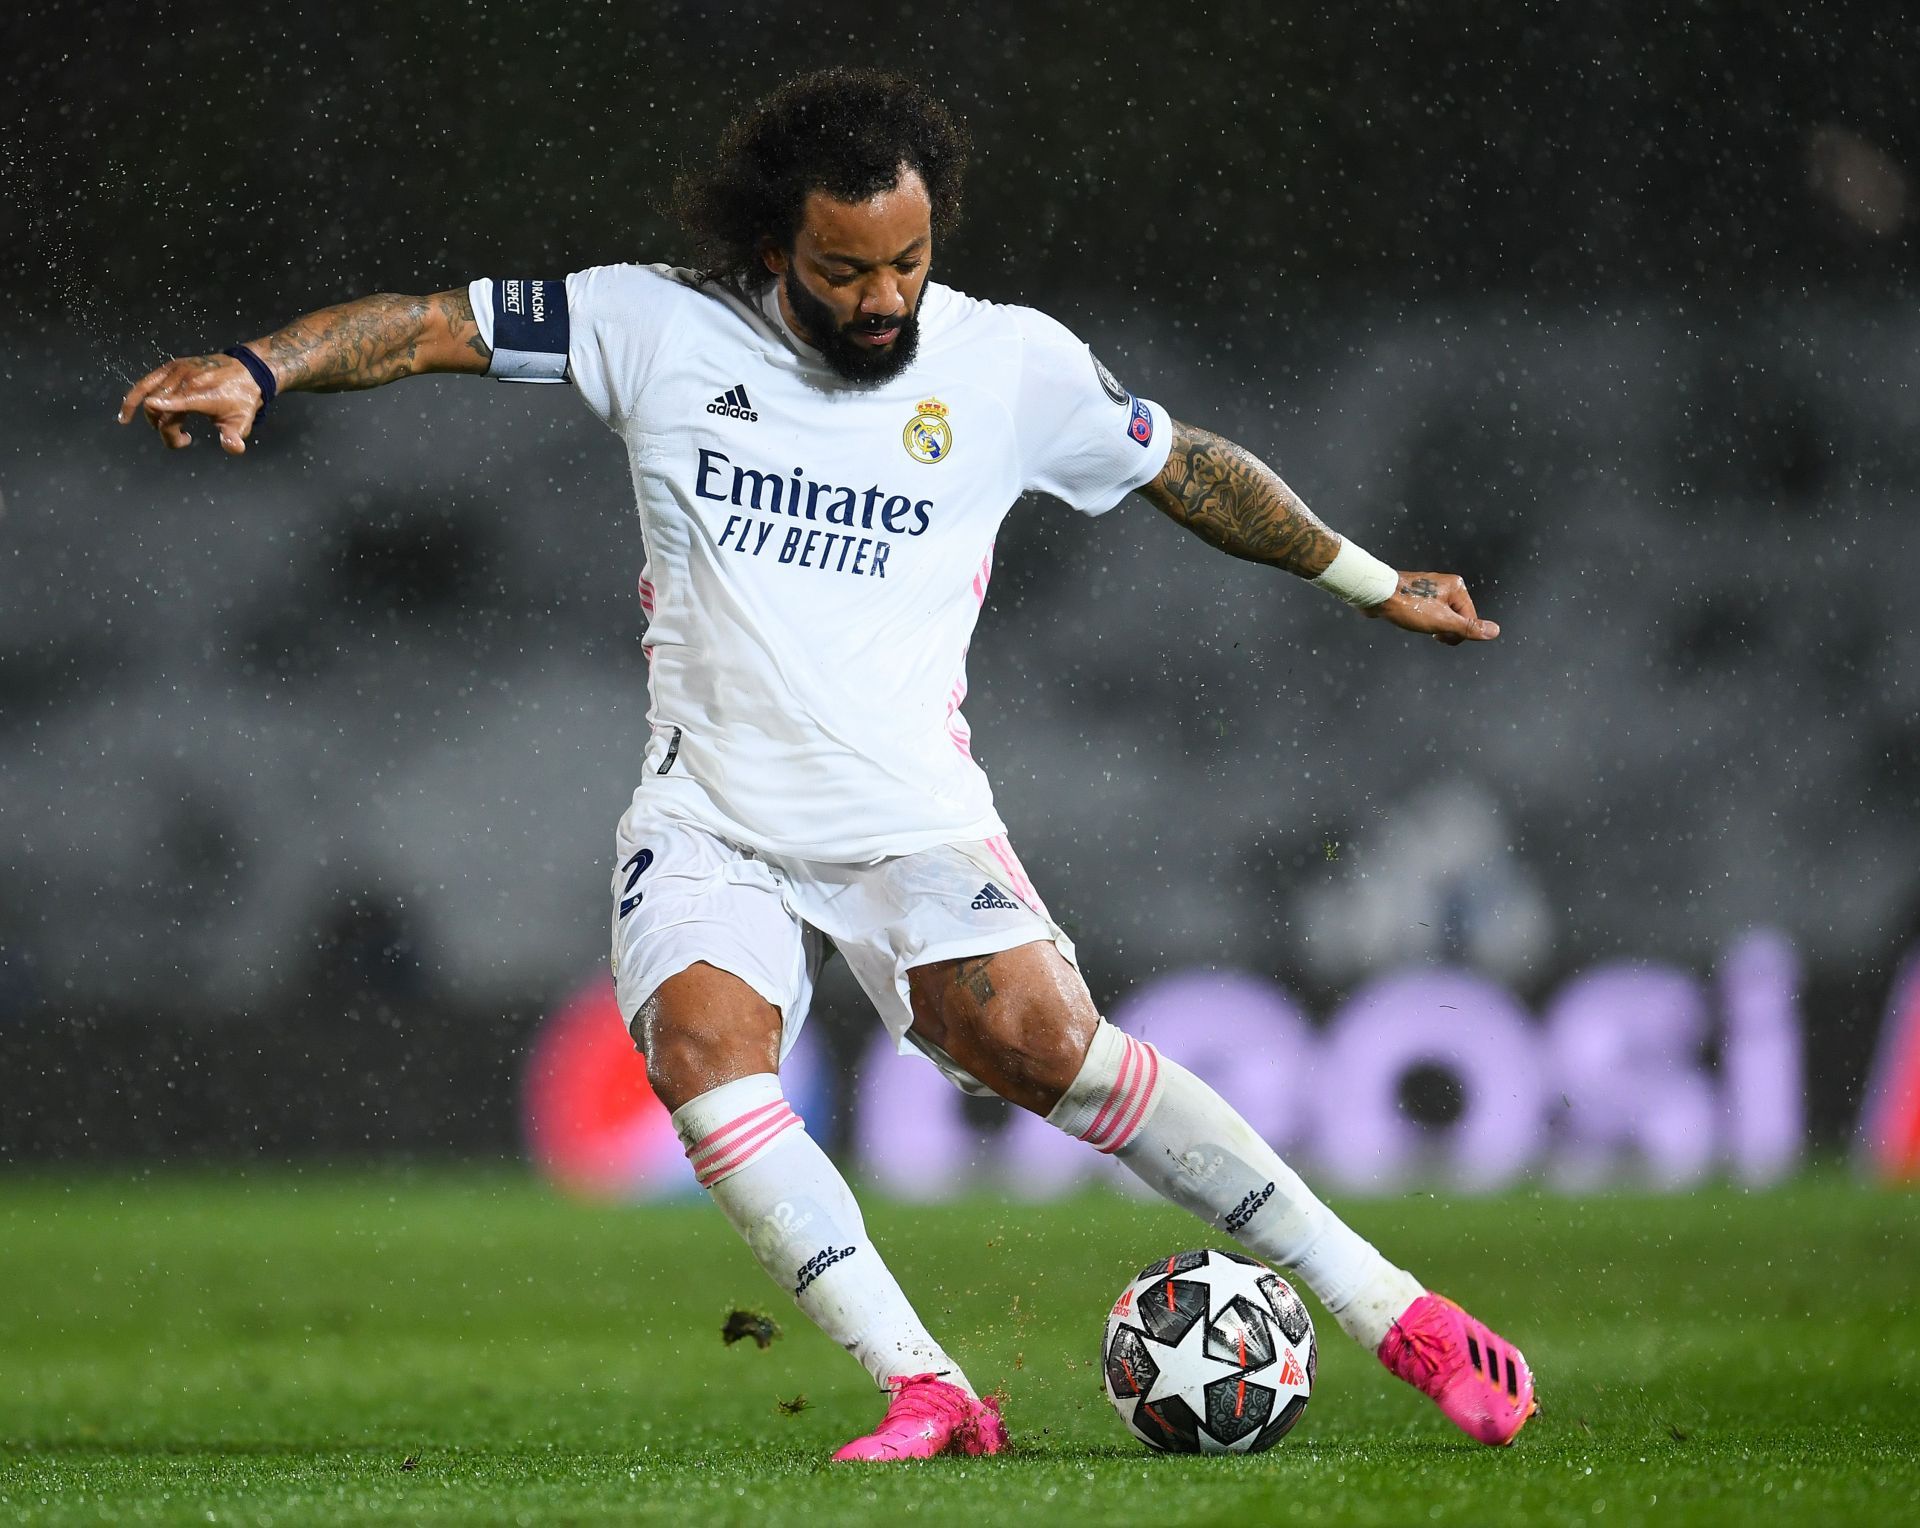 Marcelo had a game to forget.